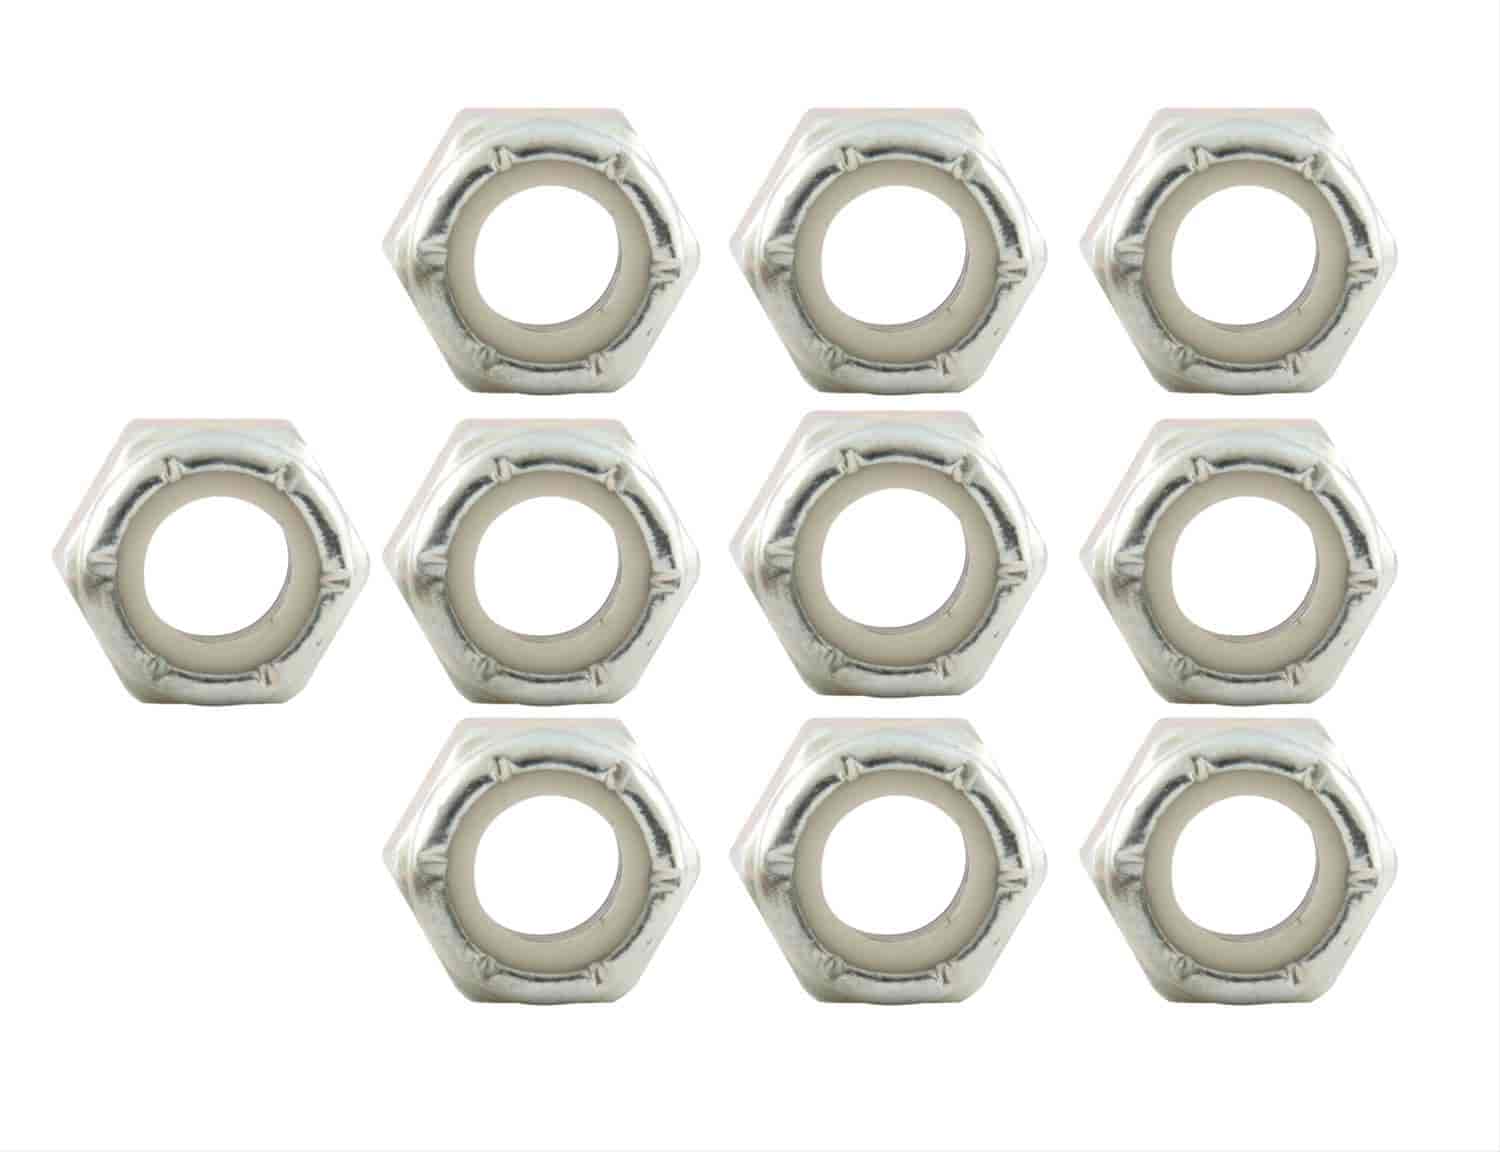 Fine Thread Hex Nuts With Nylon Inserts 5/16"-24